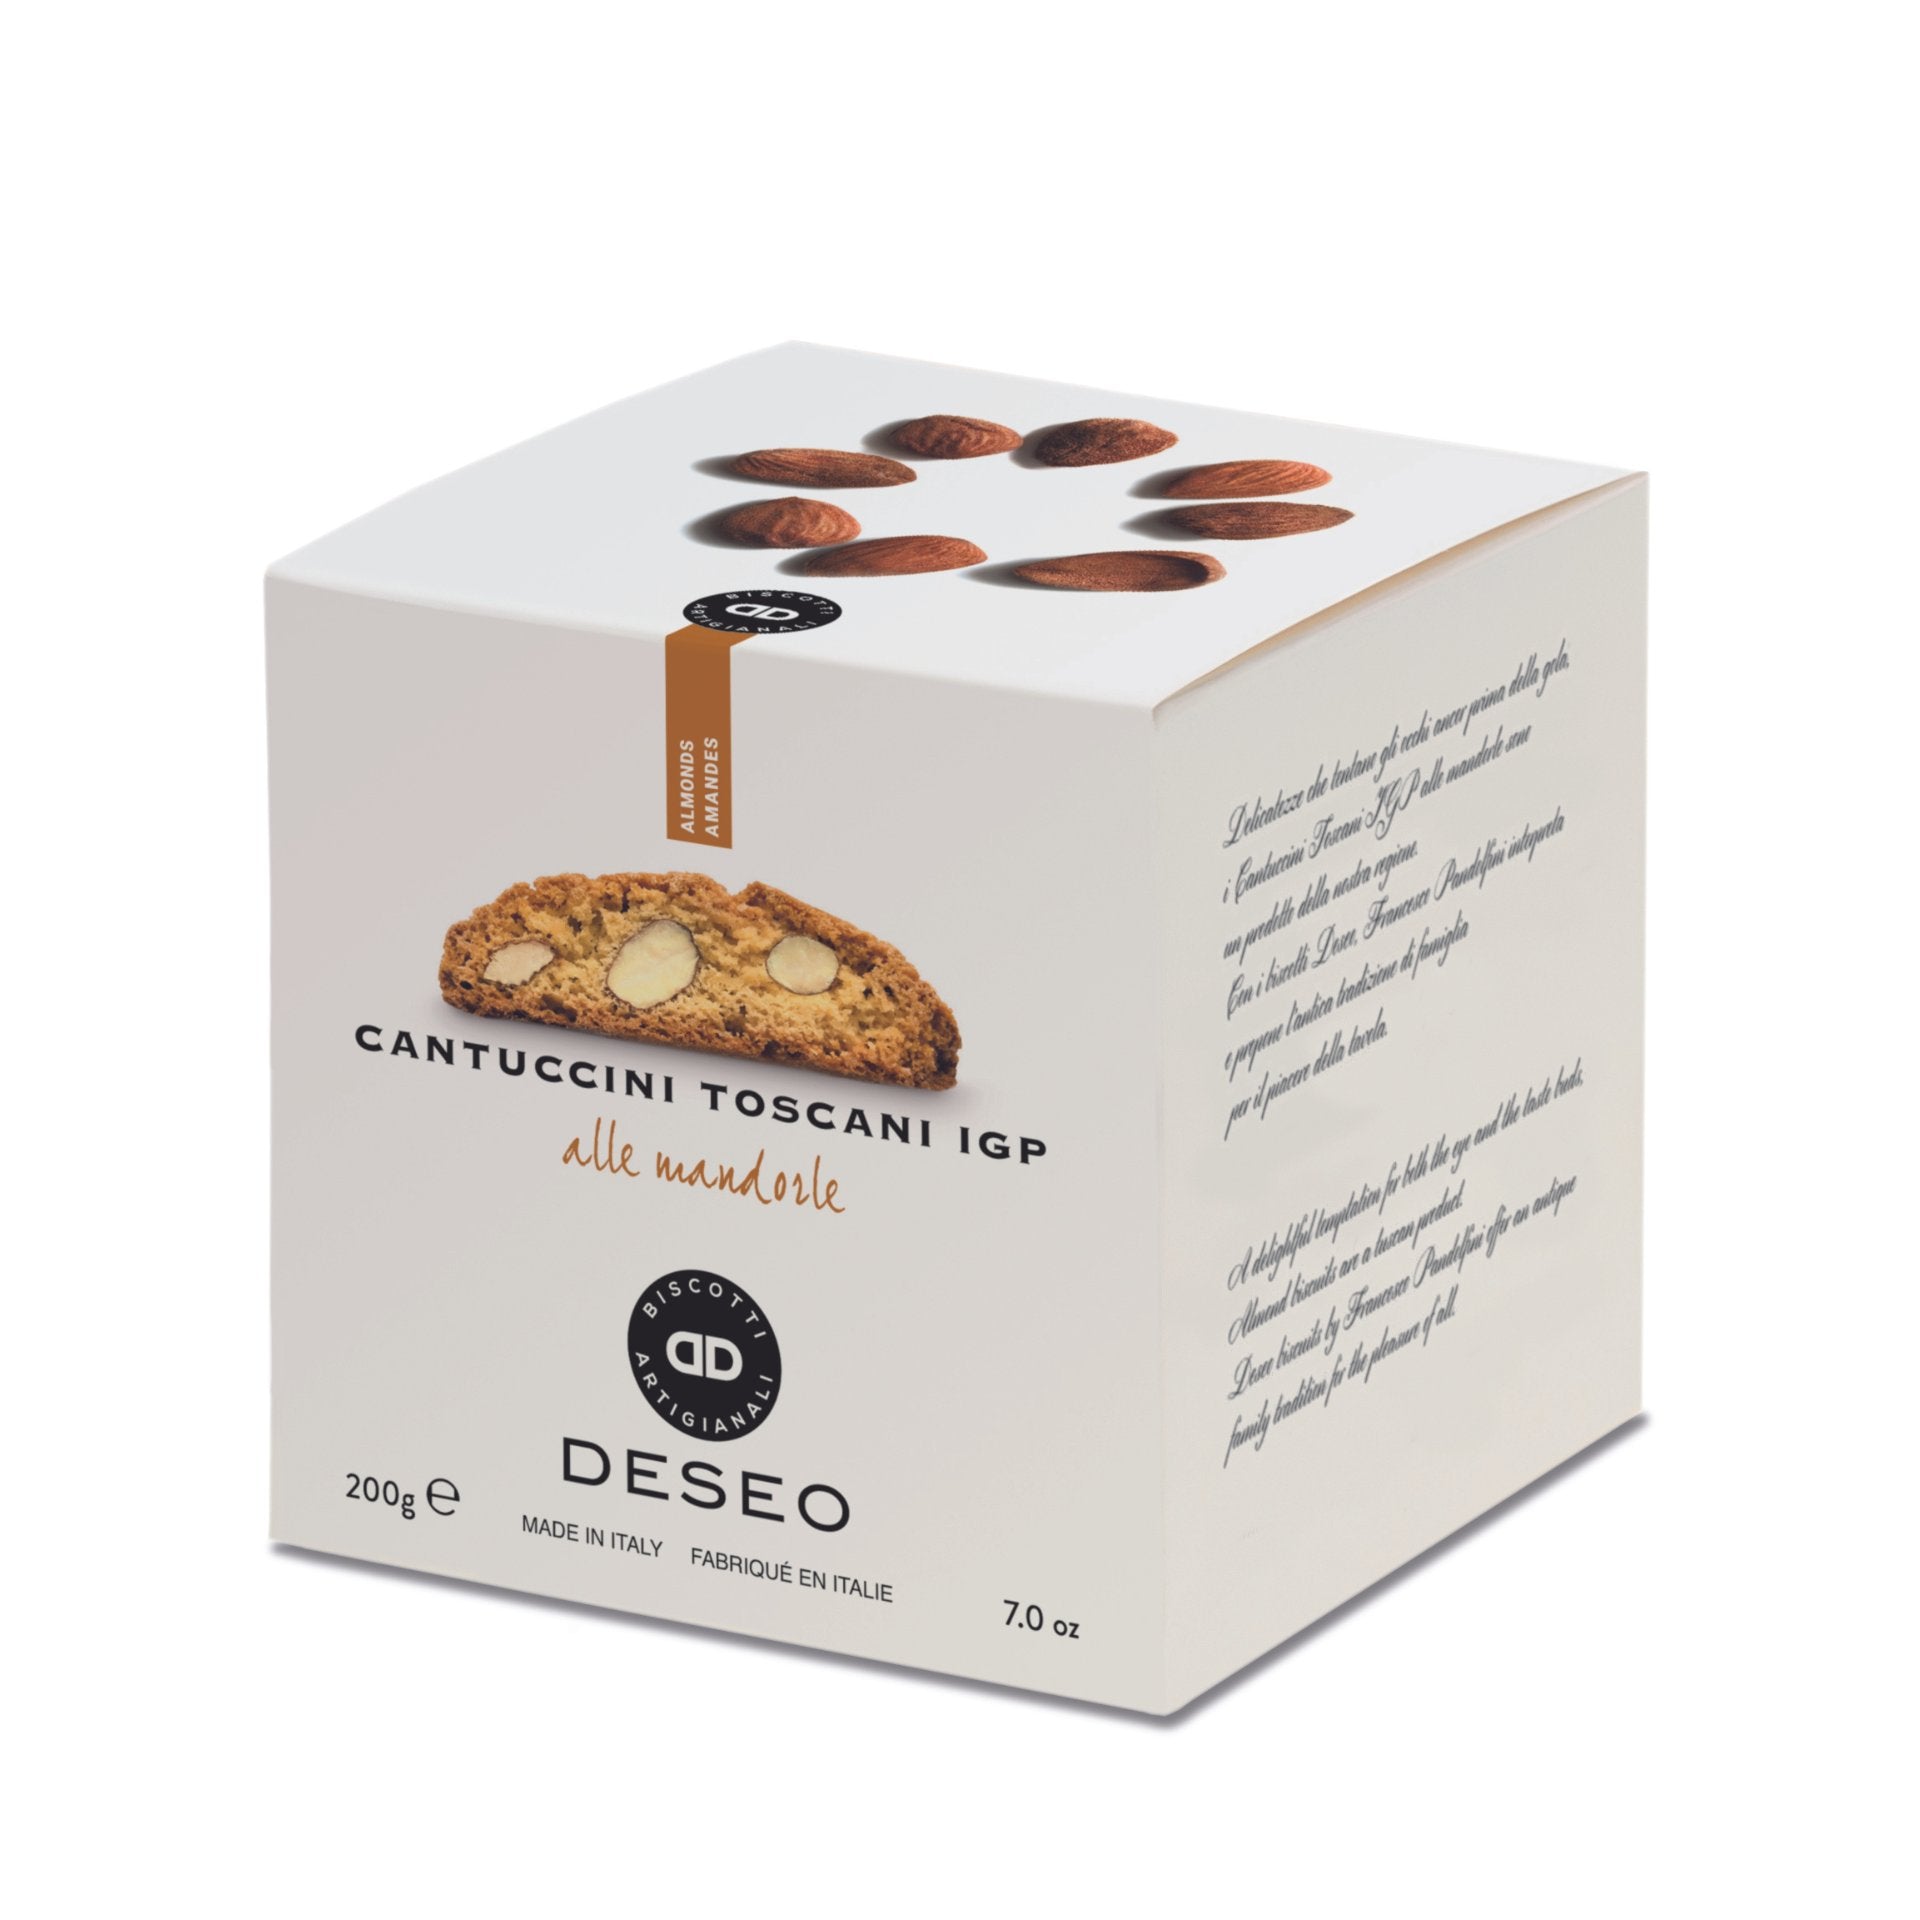 Deseo Cantuccini Toscani PGI with Almonds 200g (Box)  | Imported and distributed in the UK by Just Gourmet Foods